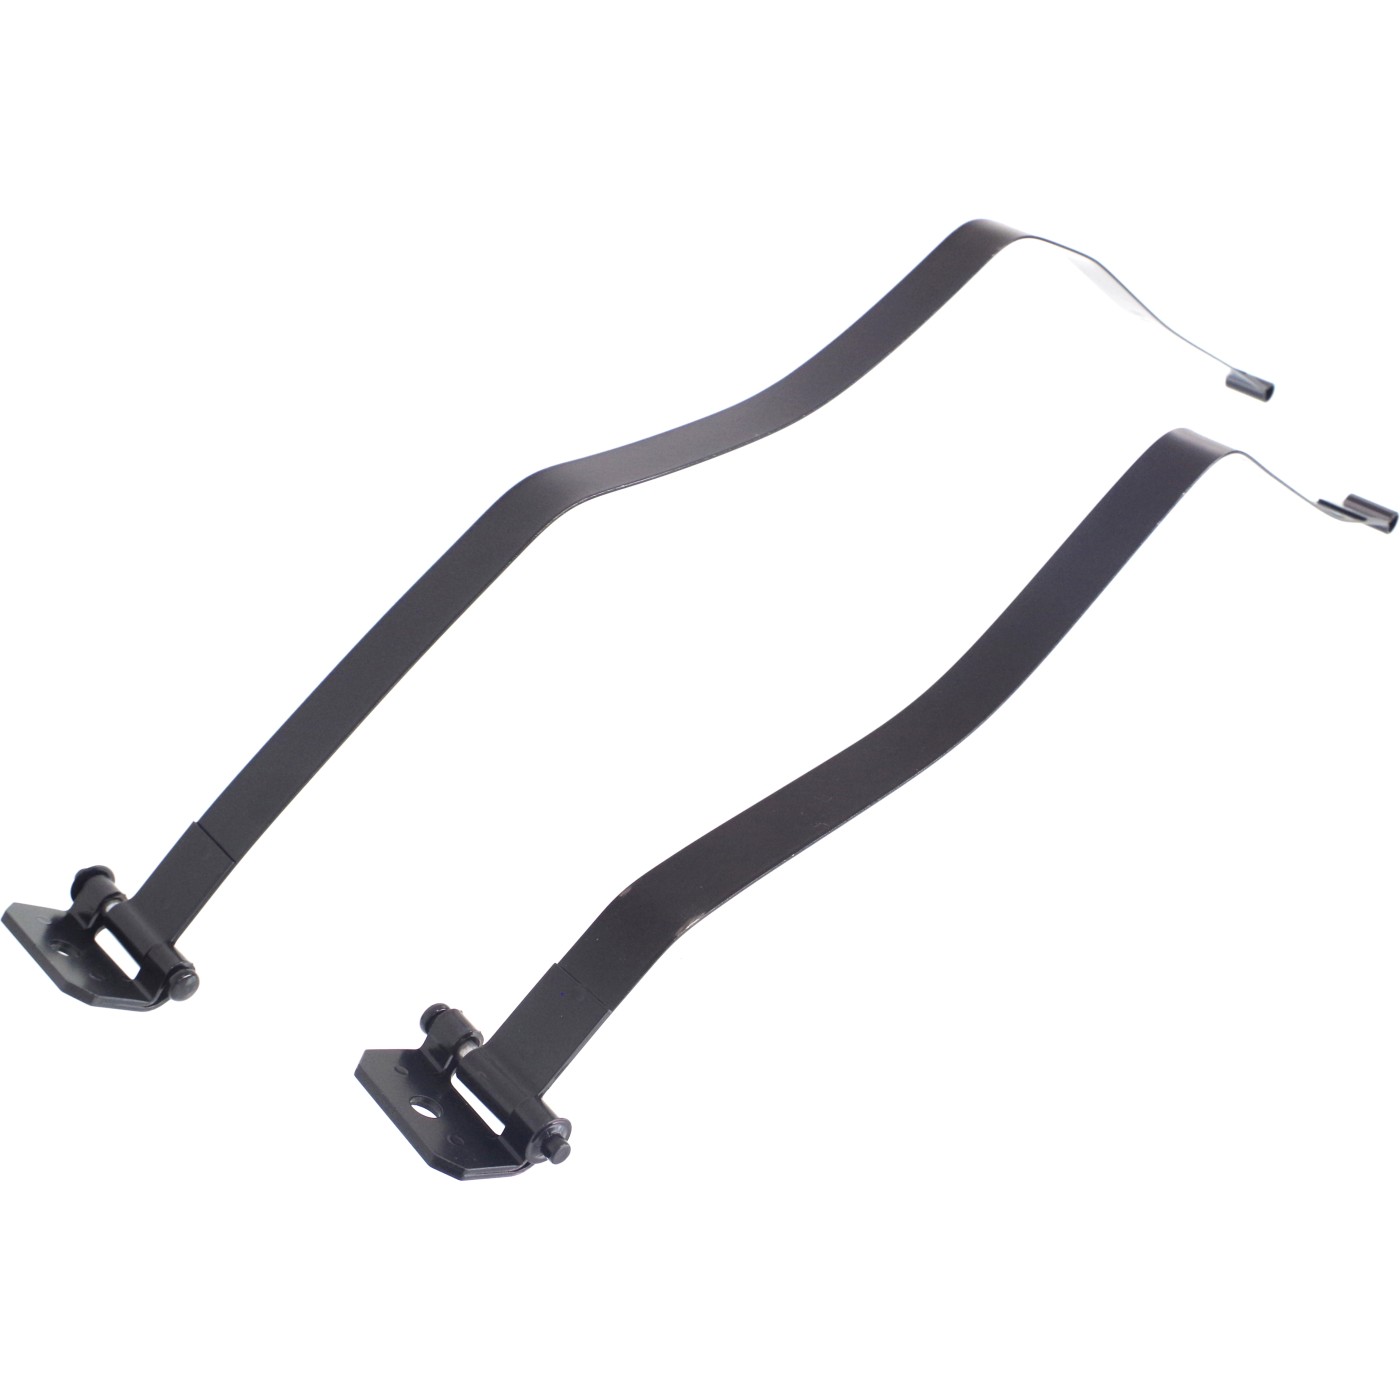 New Fuel Tank Straps Gas Set of 2 for Toyota Tundra 2000-2004